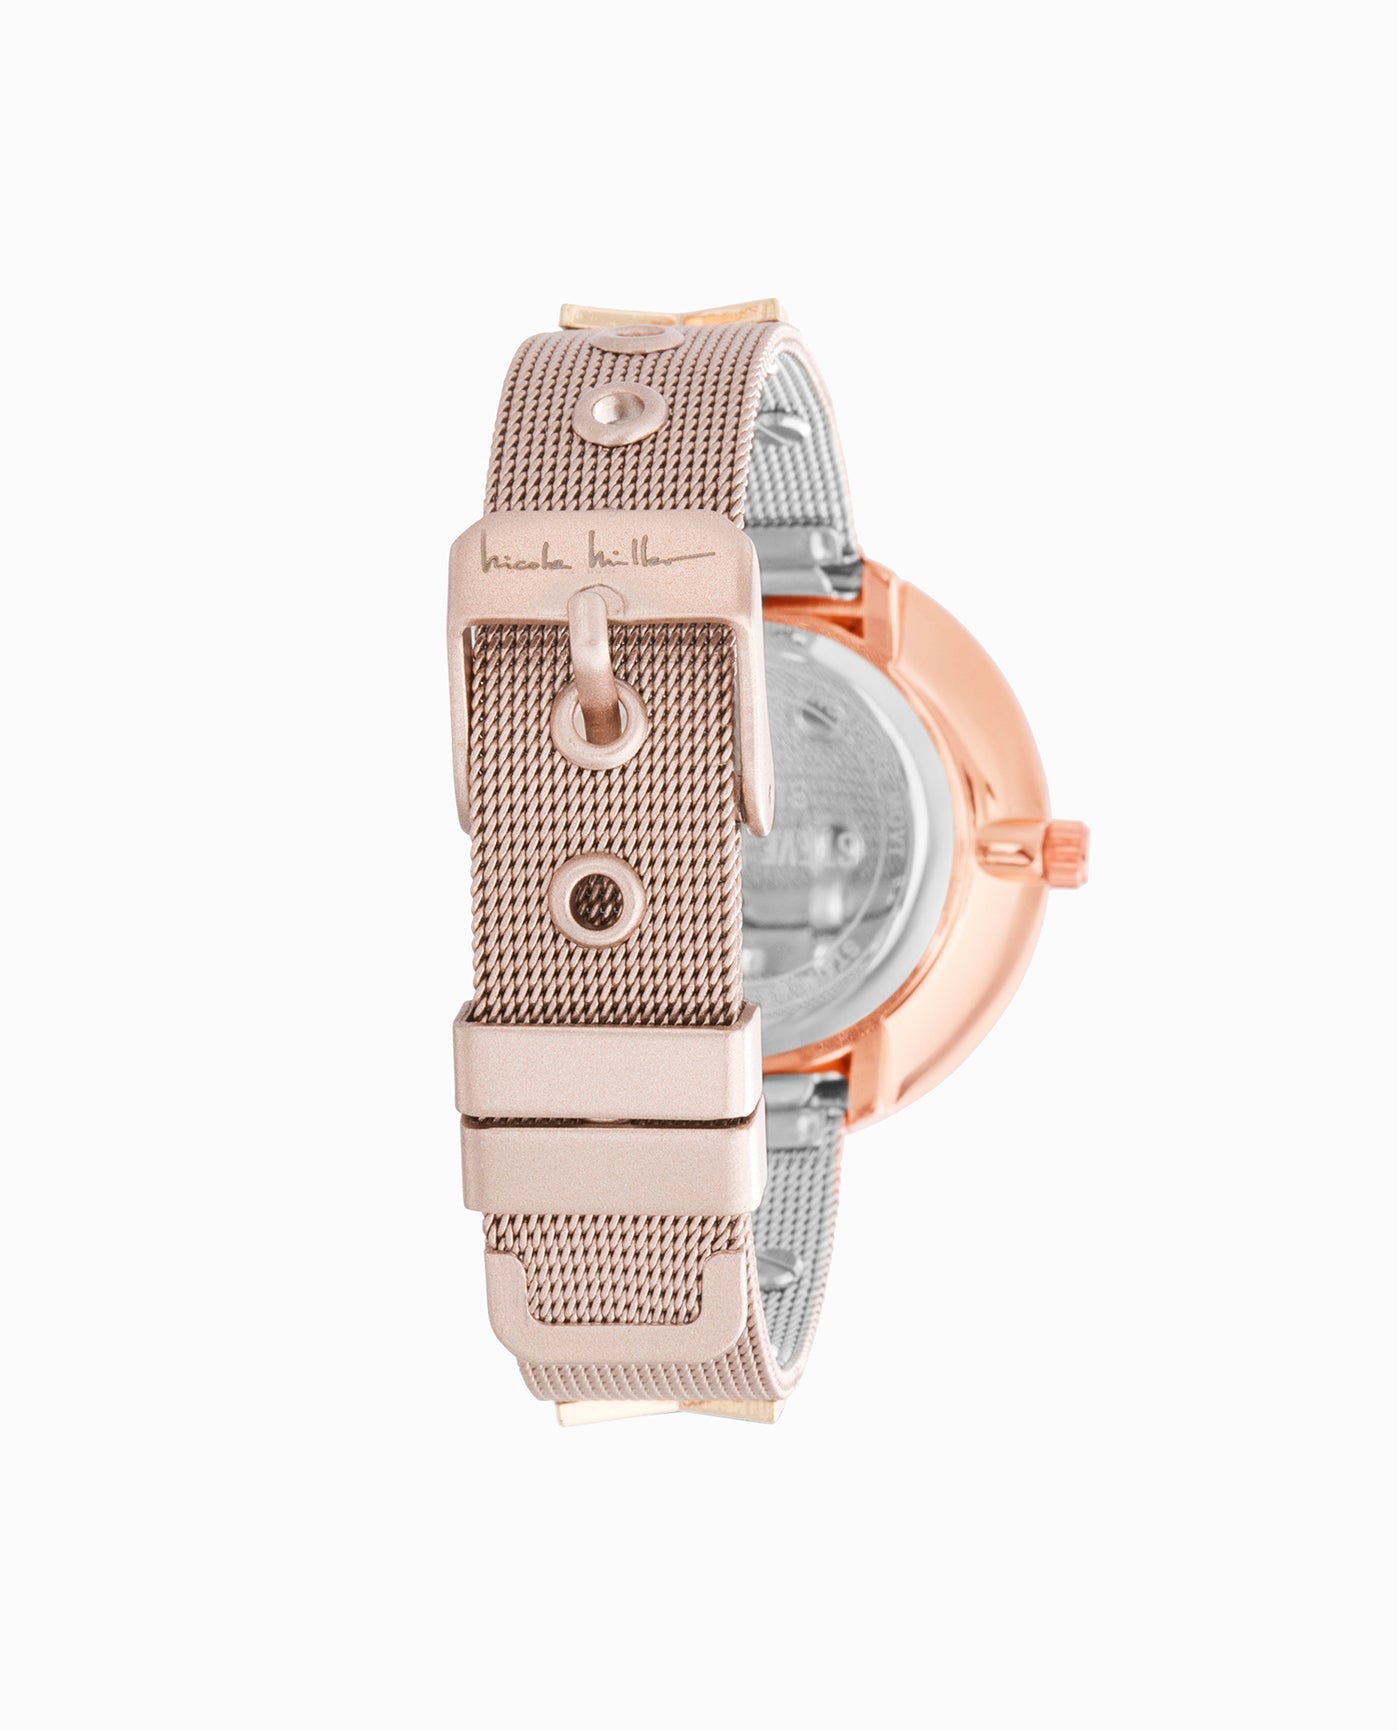 ROSE GOLD TONE STAINLESS STEEL STRAP WATCH, 36mm BAND CLOSE UP | Rose Gold